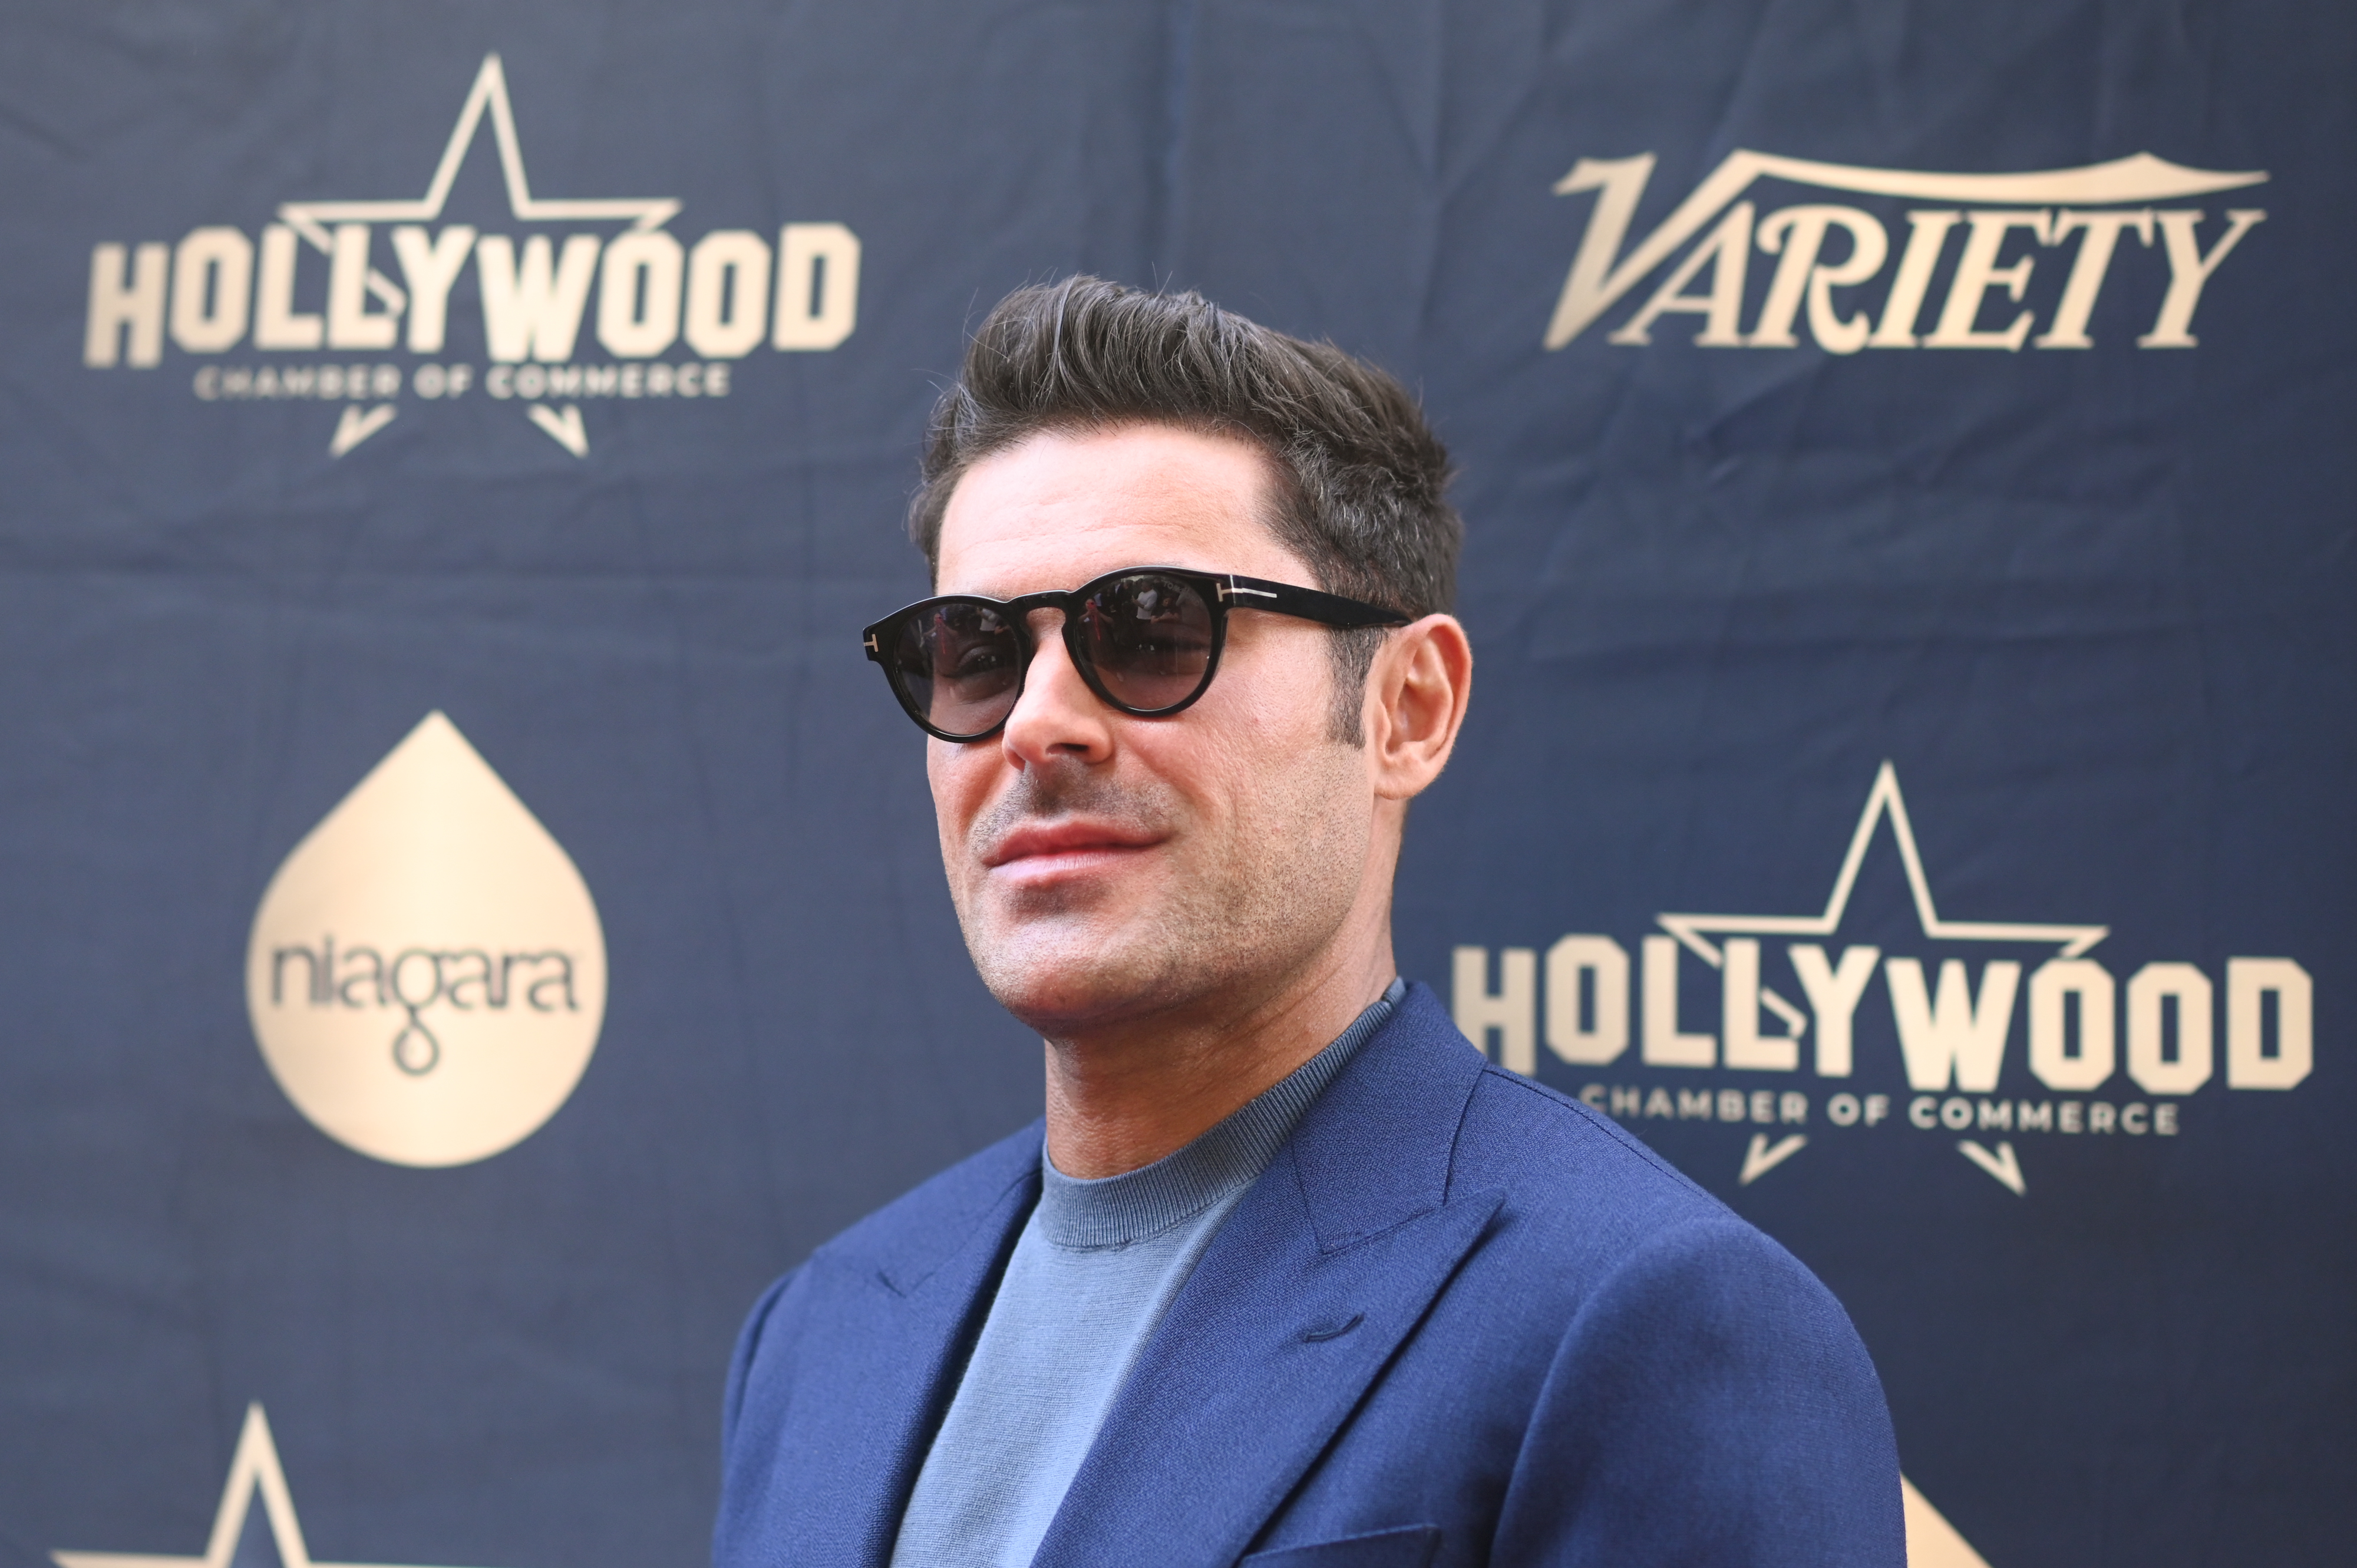 Close-up of Zac wearing sunglasses at a media event